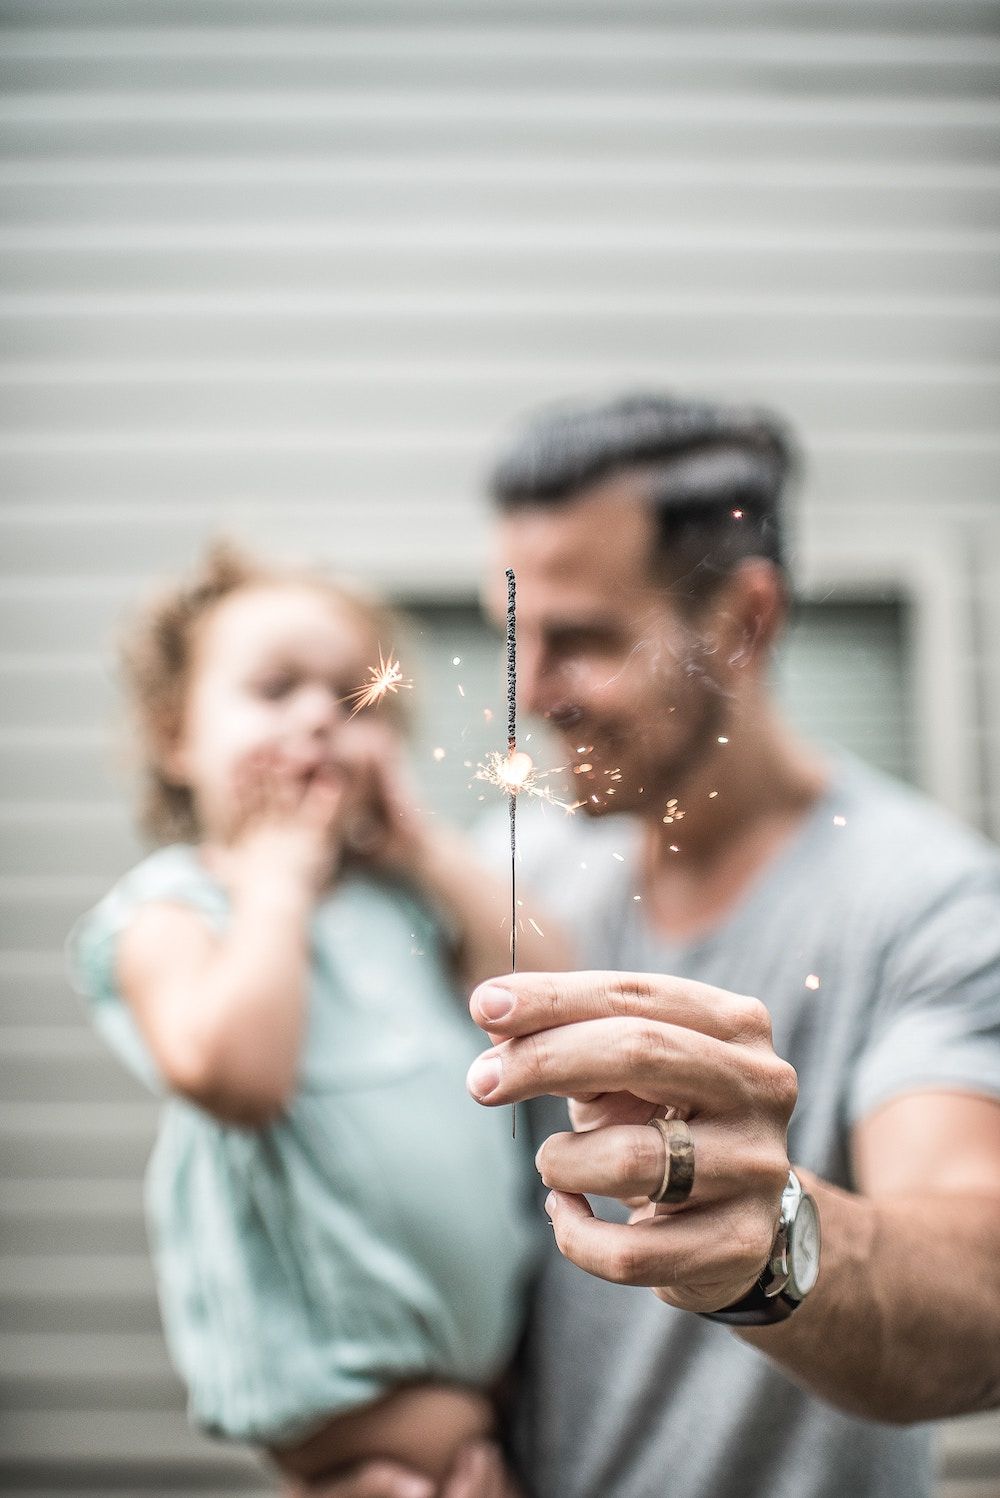 father holding daughter and celebrating with a sparkler